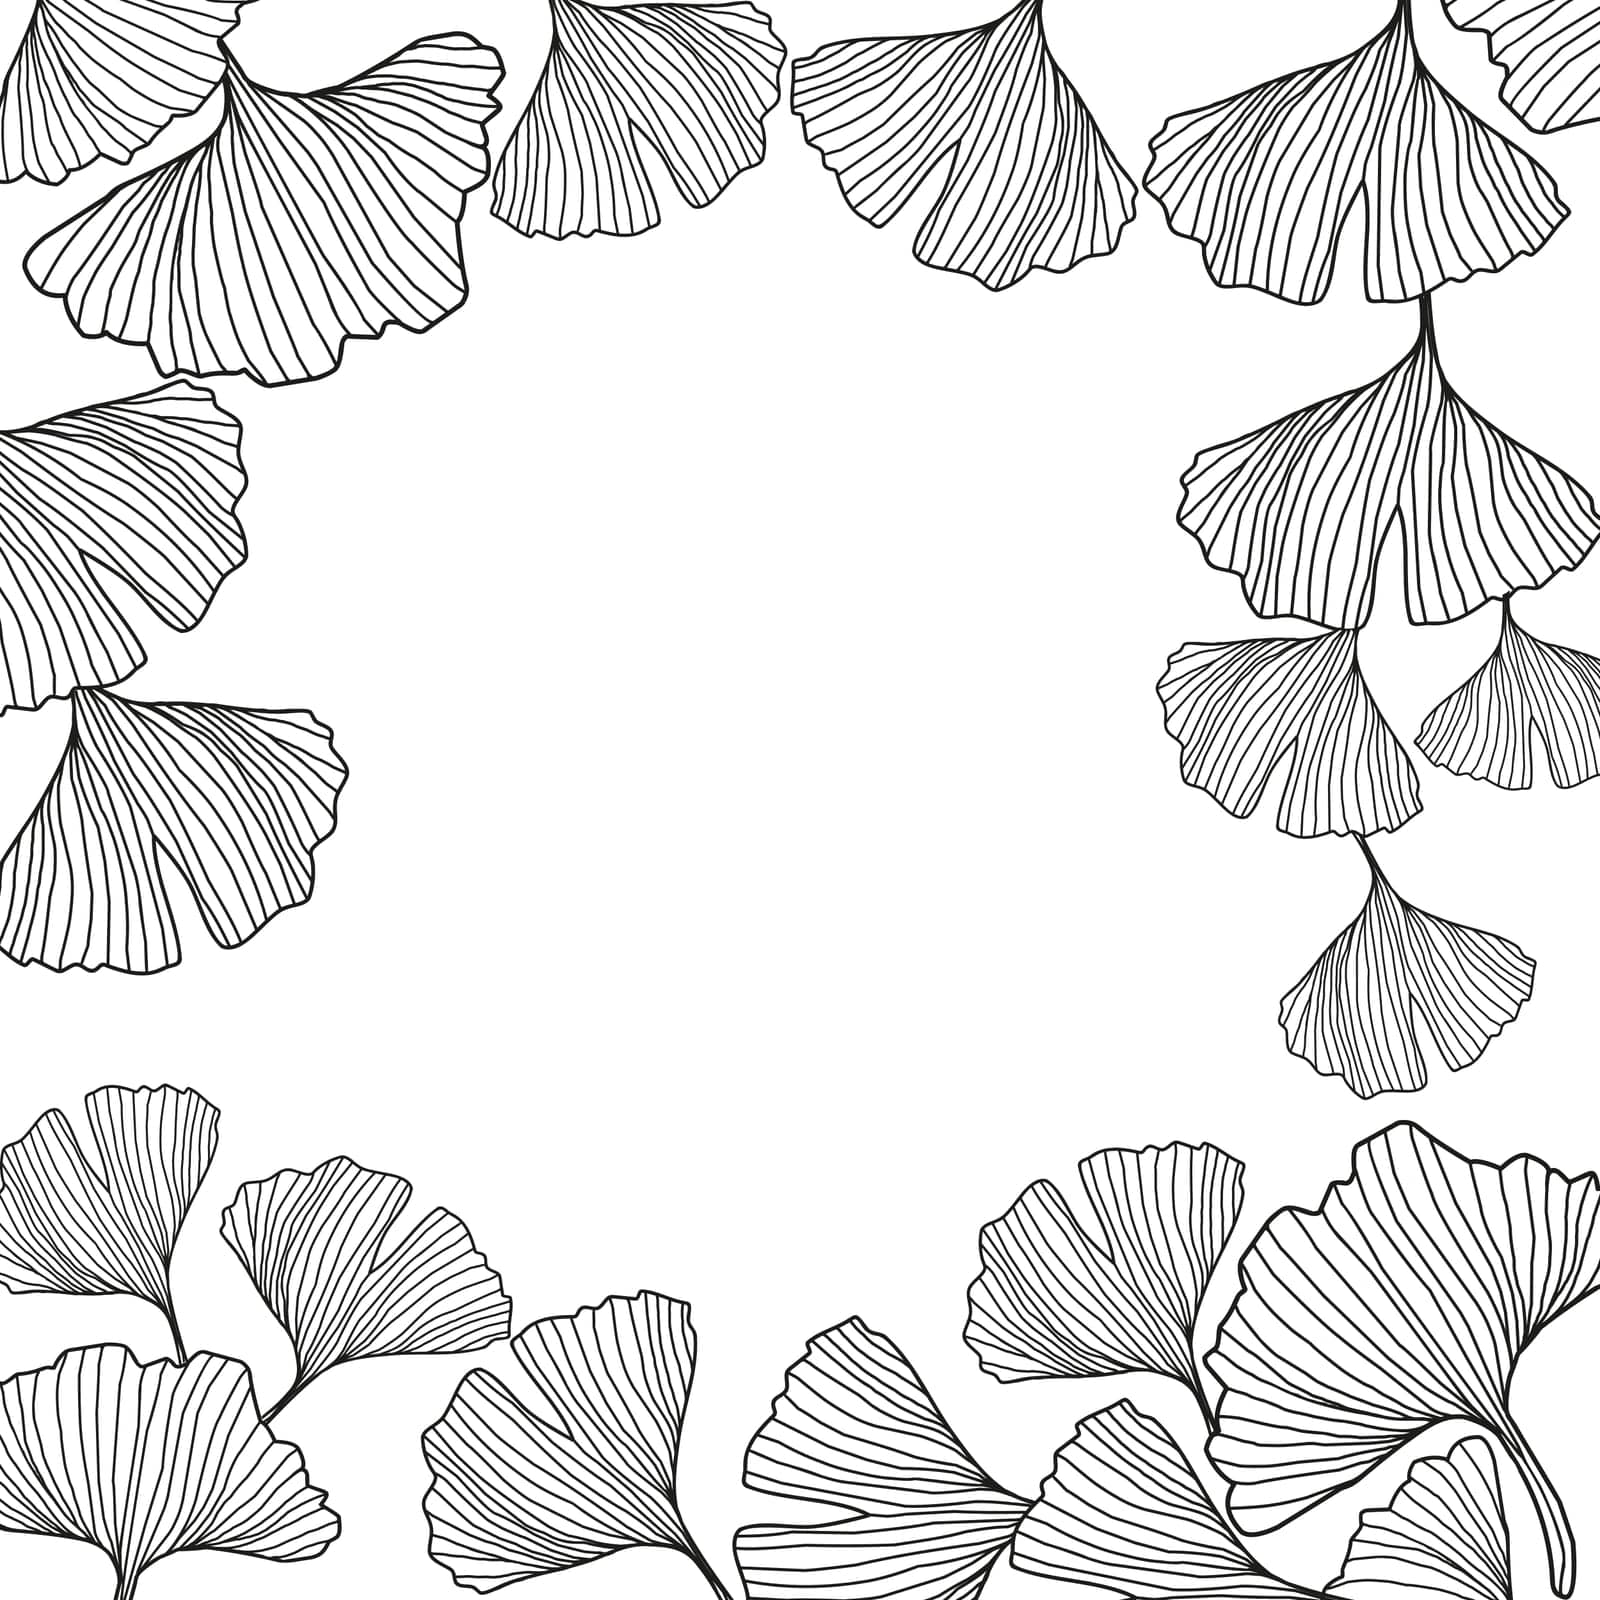 Hand drawn leaves vector frame. Floral wreath with leaves for wedding and holiday invite or card Decorative elements for design